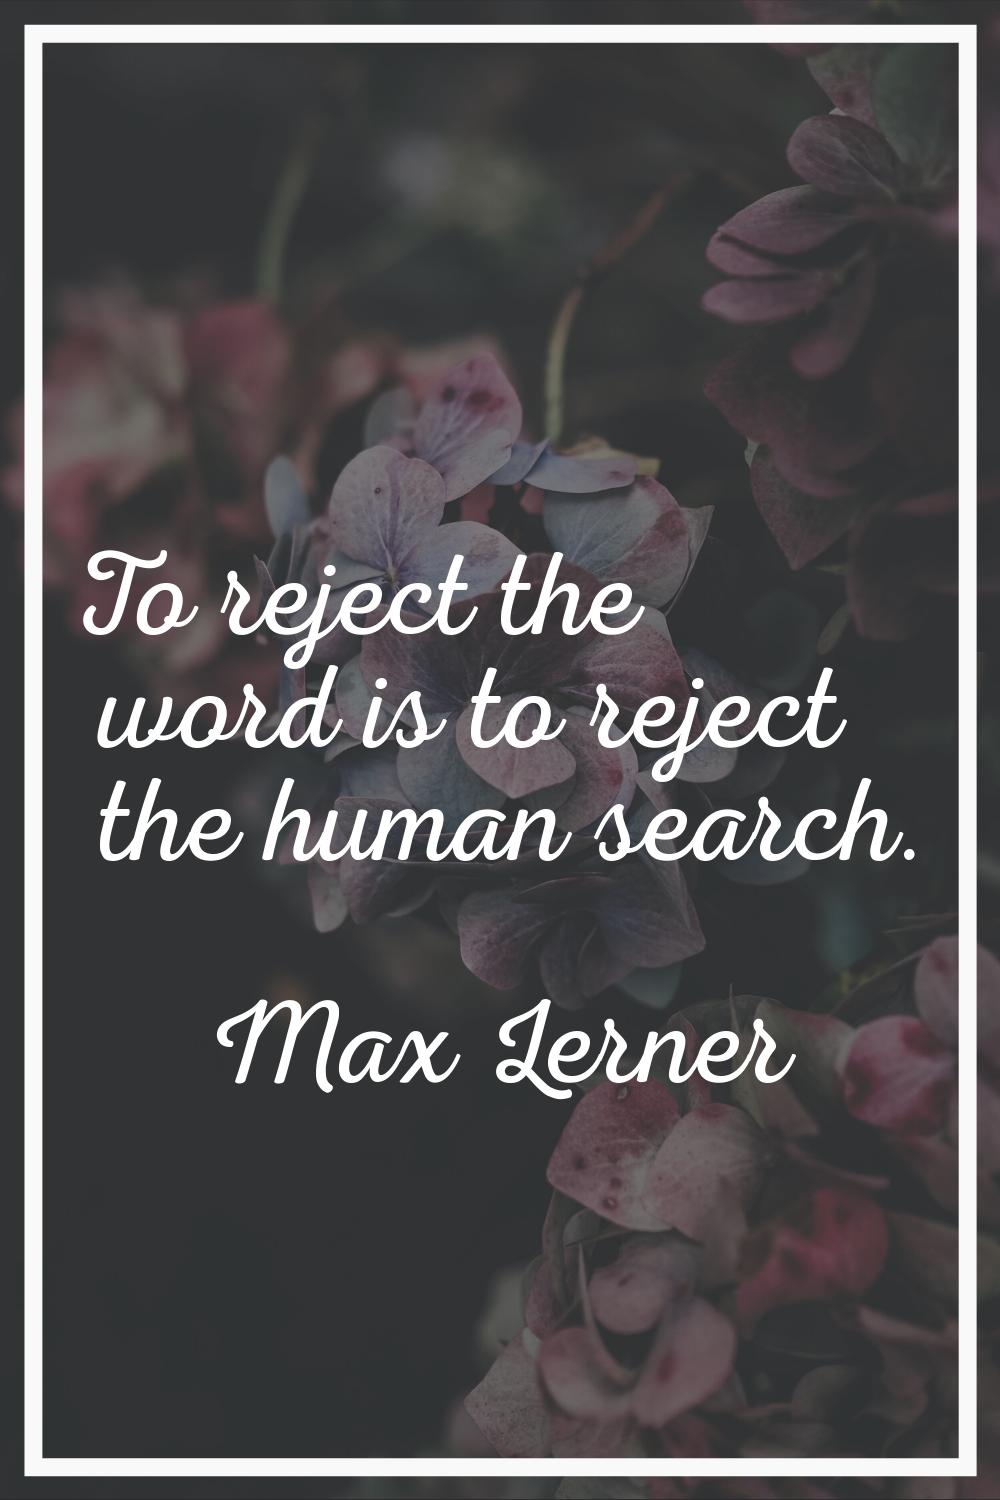 To reject the word is to reject the human search.